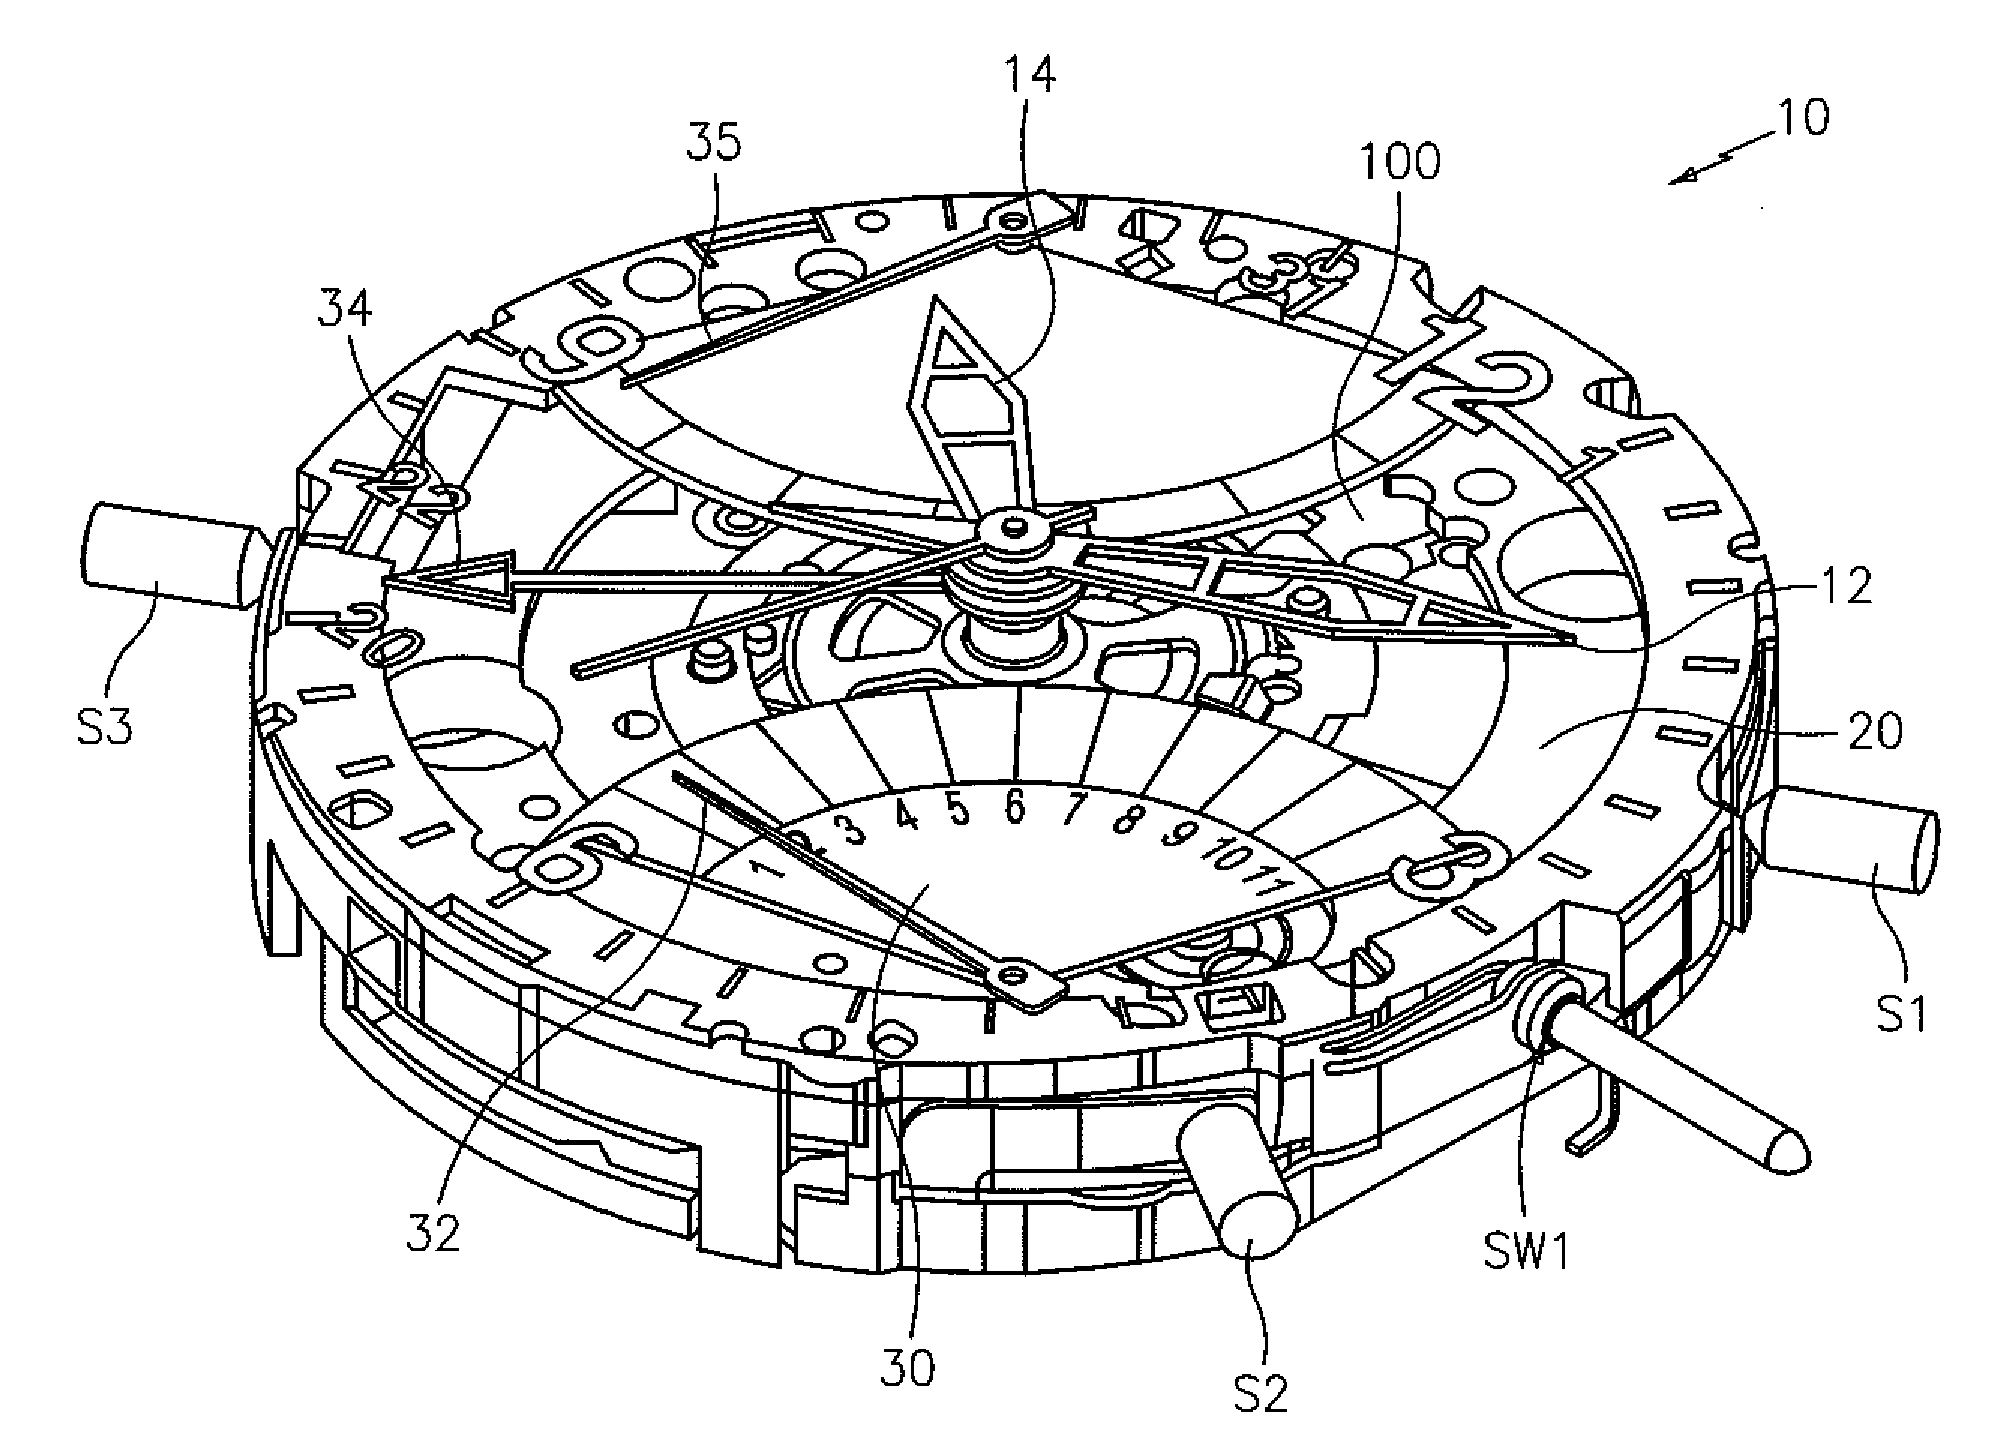 Wearable Electronic Device with Secondary Digital Display